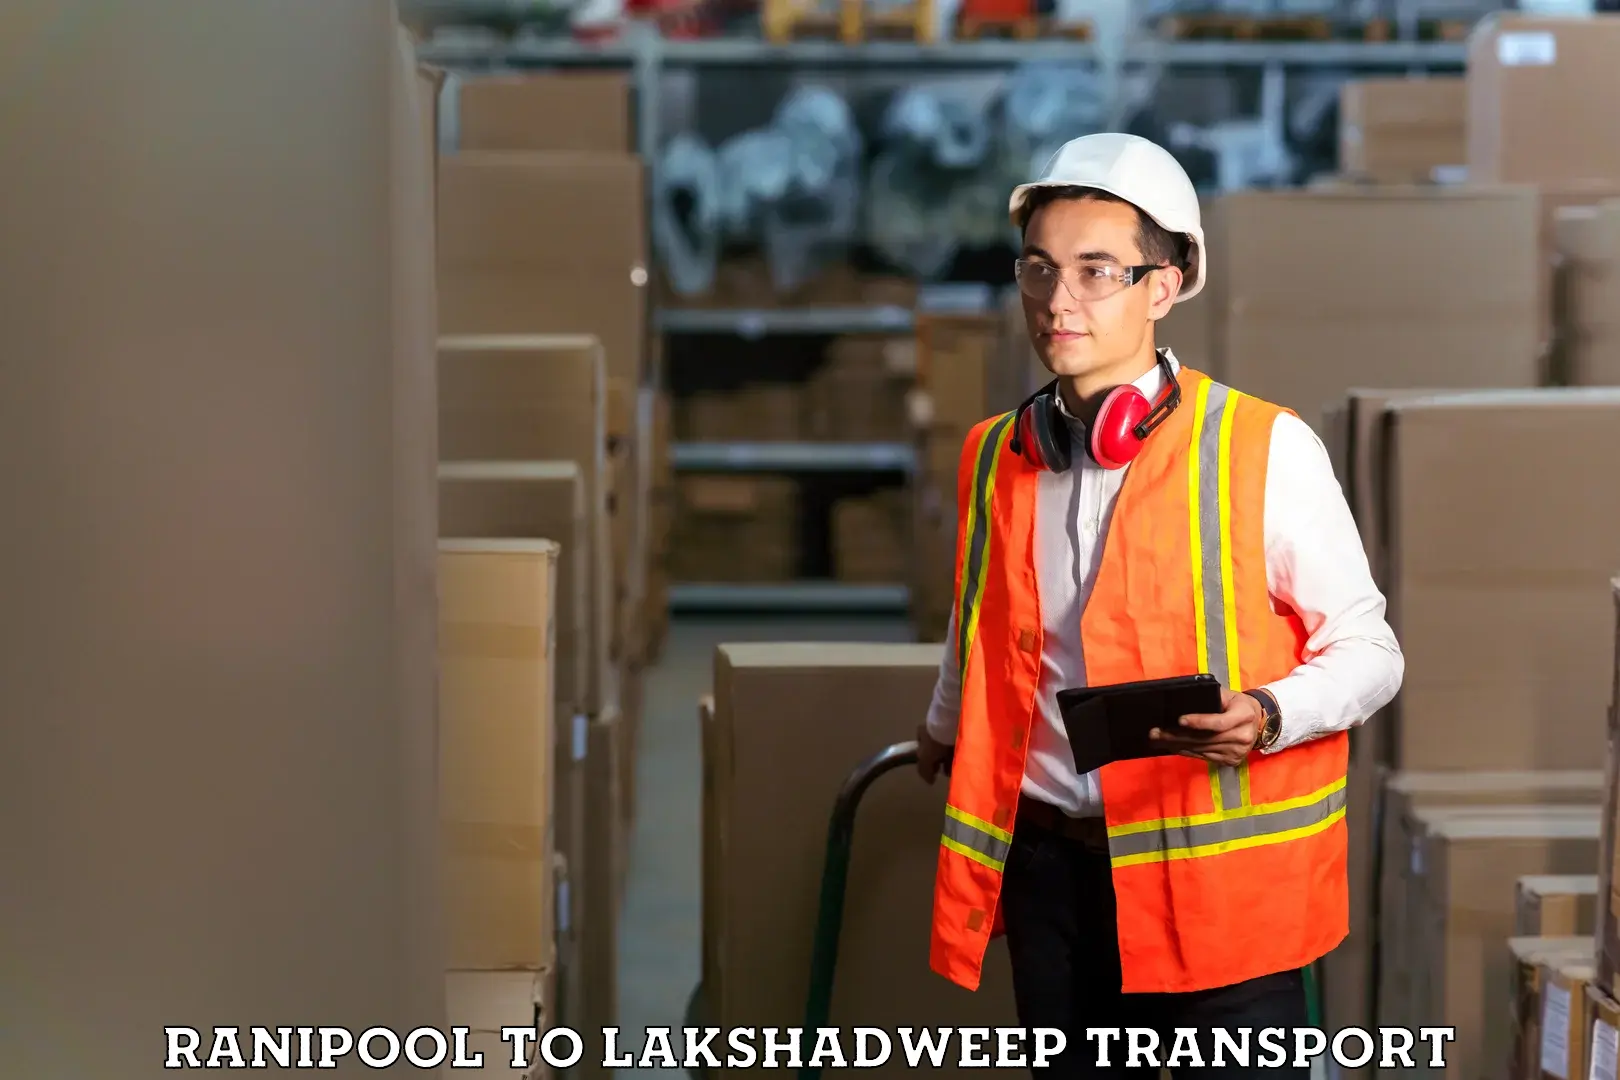 Goods delivery service Ranipool to Lakshadweep